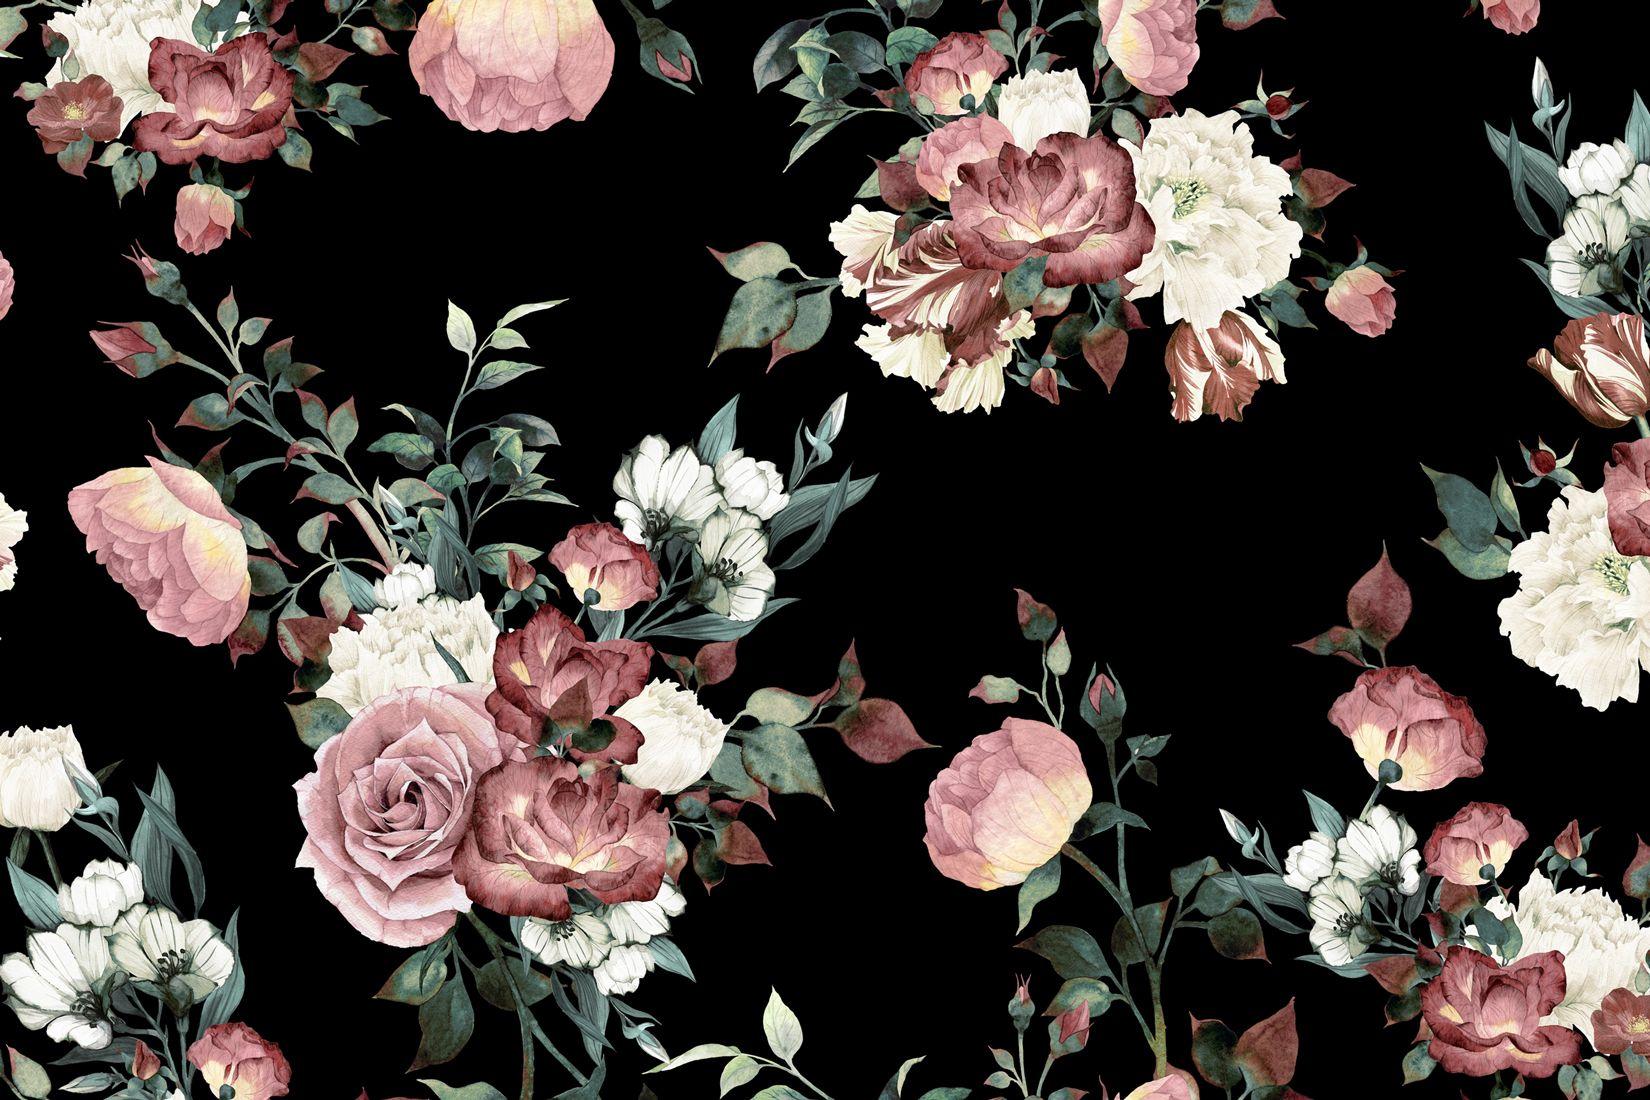 Black and Pink Floral Wallpapers - Top Free Black and Pink Floral